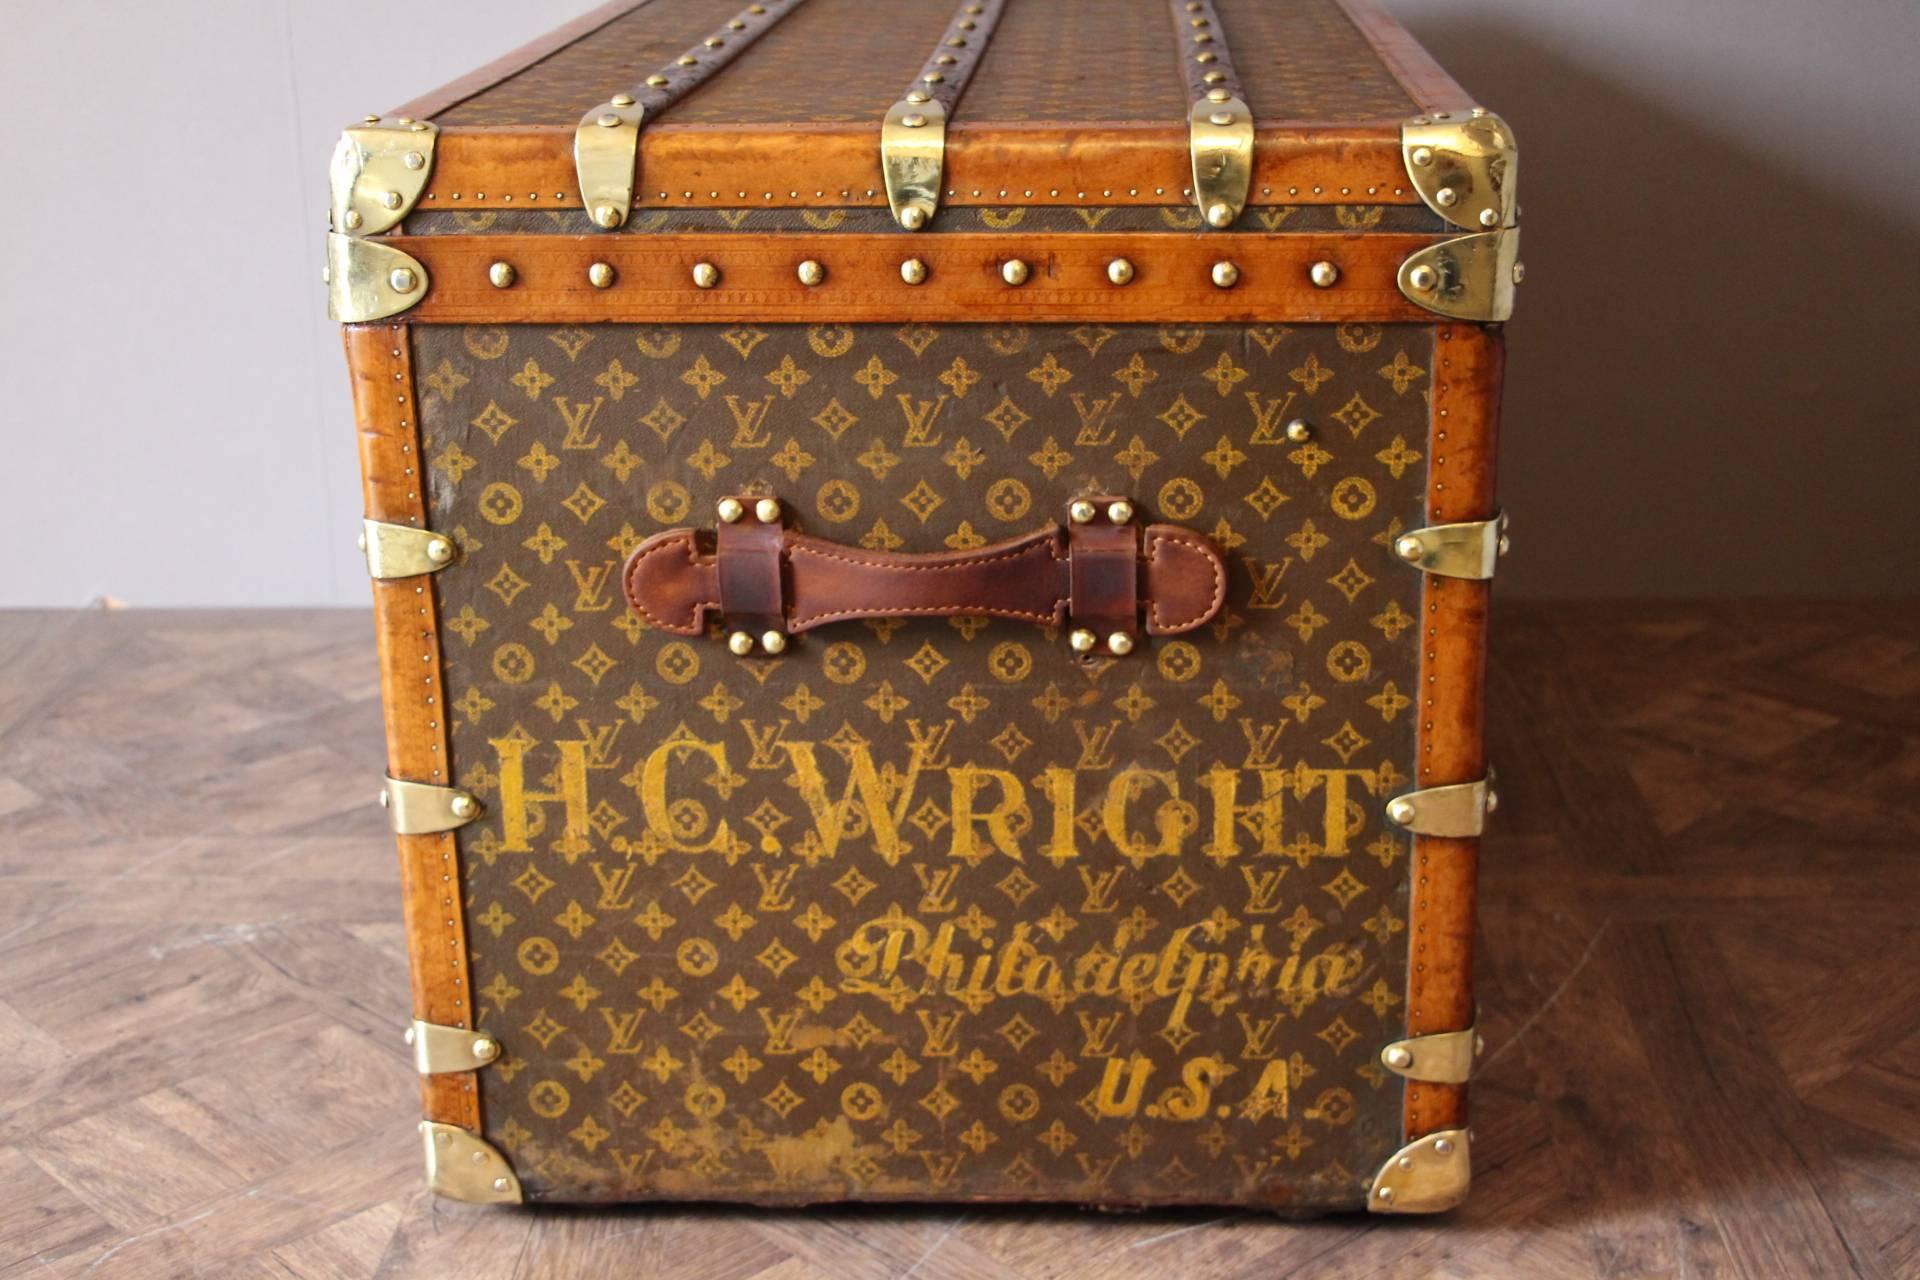 This superb Louis Vuitton steamer trunk features monogramm canvas, lozine trim, LV stamped locks and studs as well as leather side handles and brass corners. It has got a beautiful original patina and is very elegant.
Its interior is all original